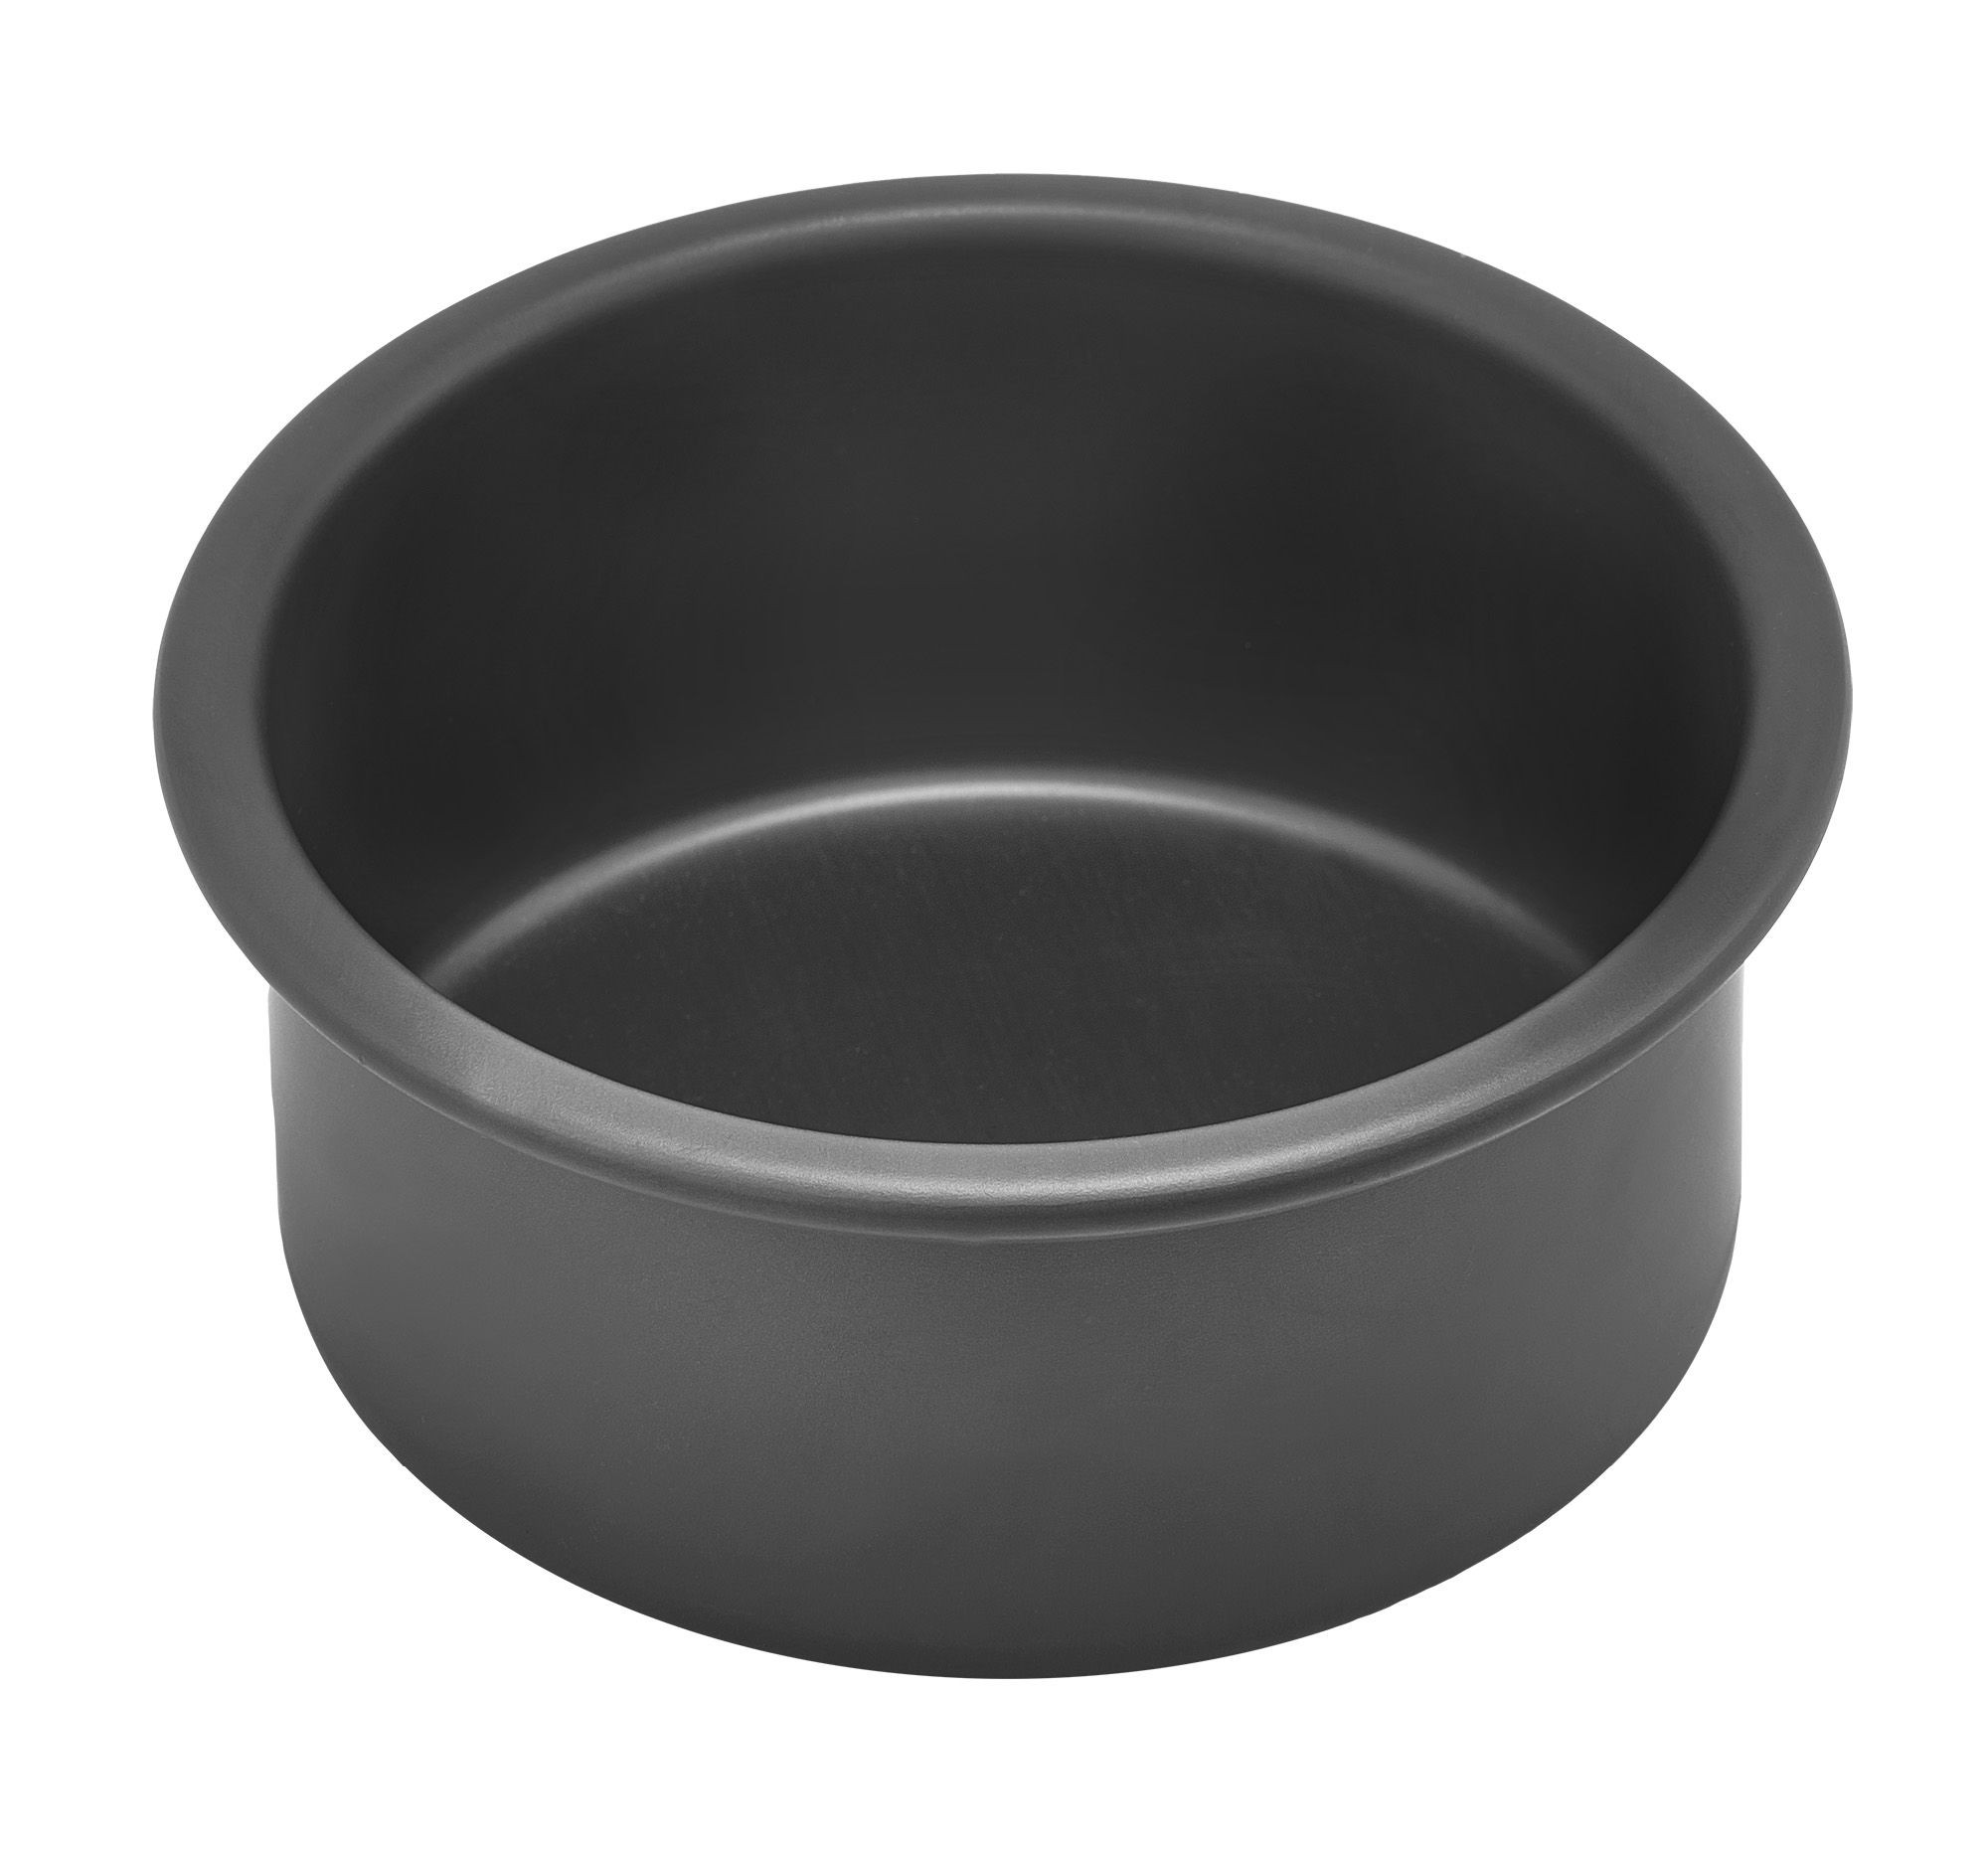 Winco HAC-042 Deluxe Hard Anodized Aluminum 4" x 2" Round Cake Pan